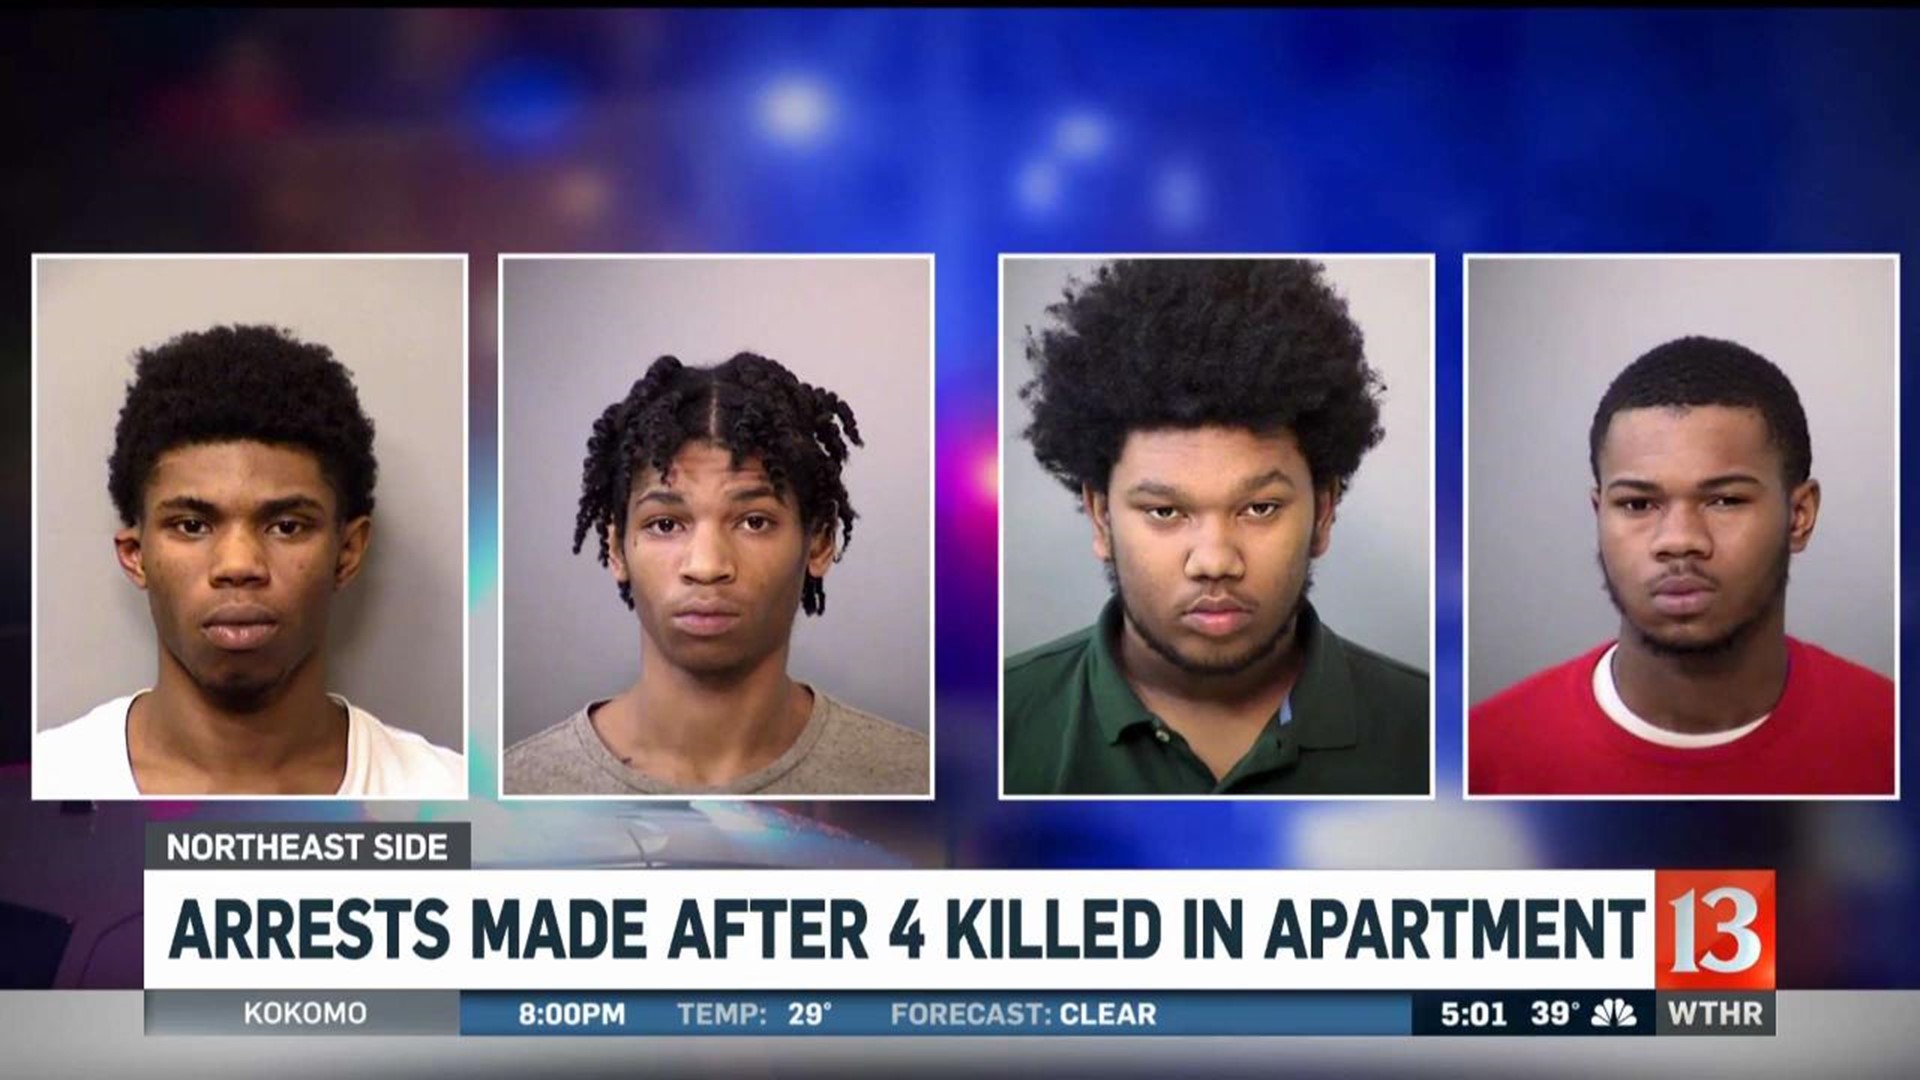 Arrests made after 4 killed in apartment